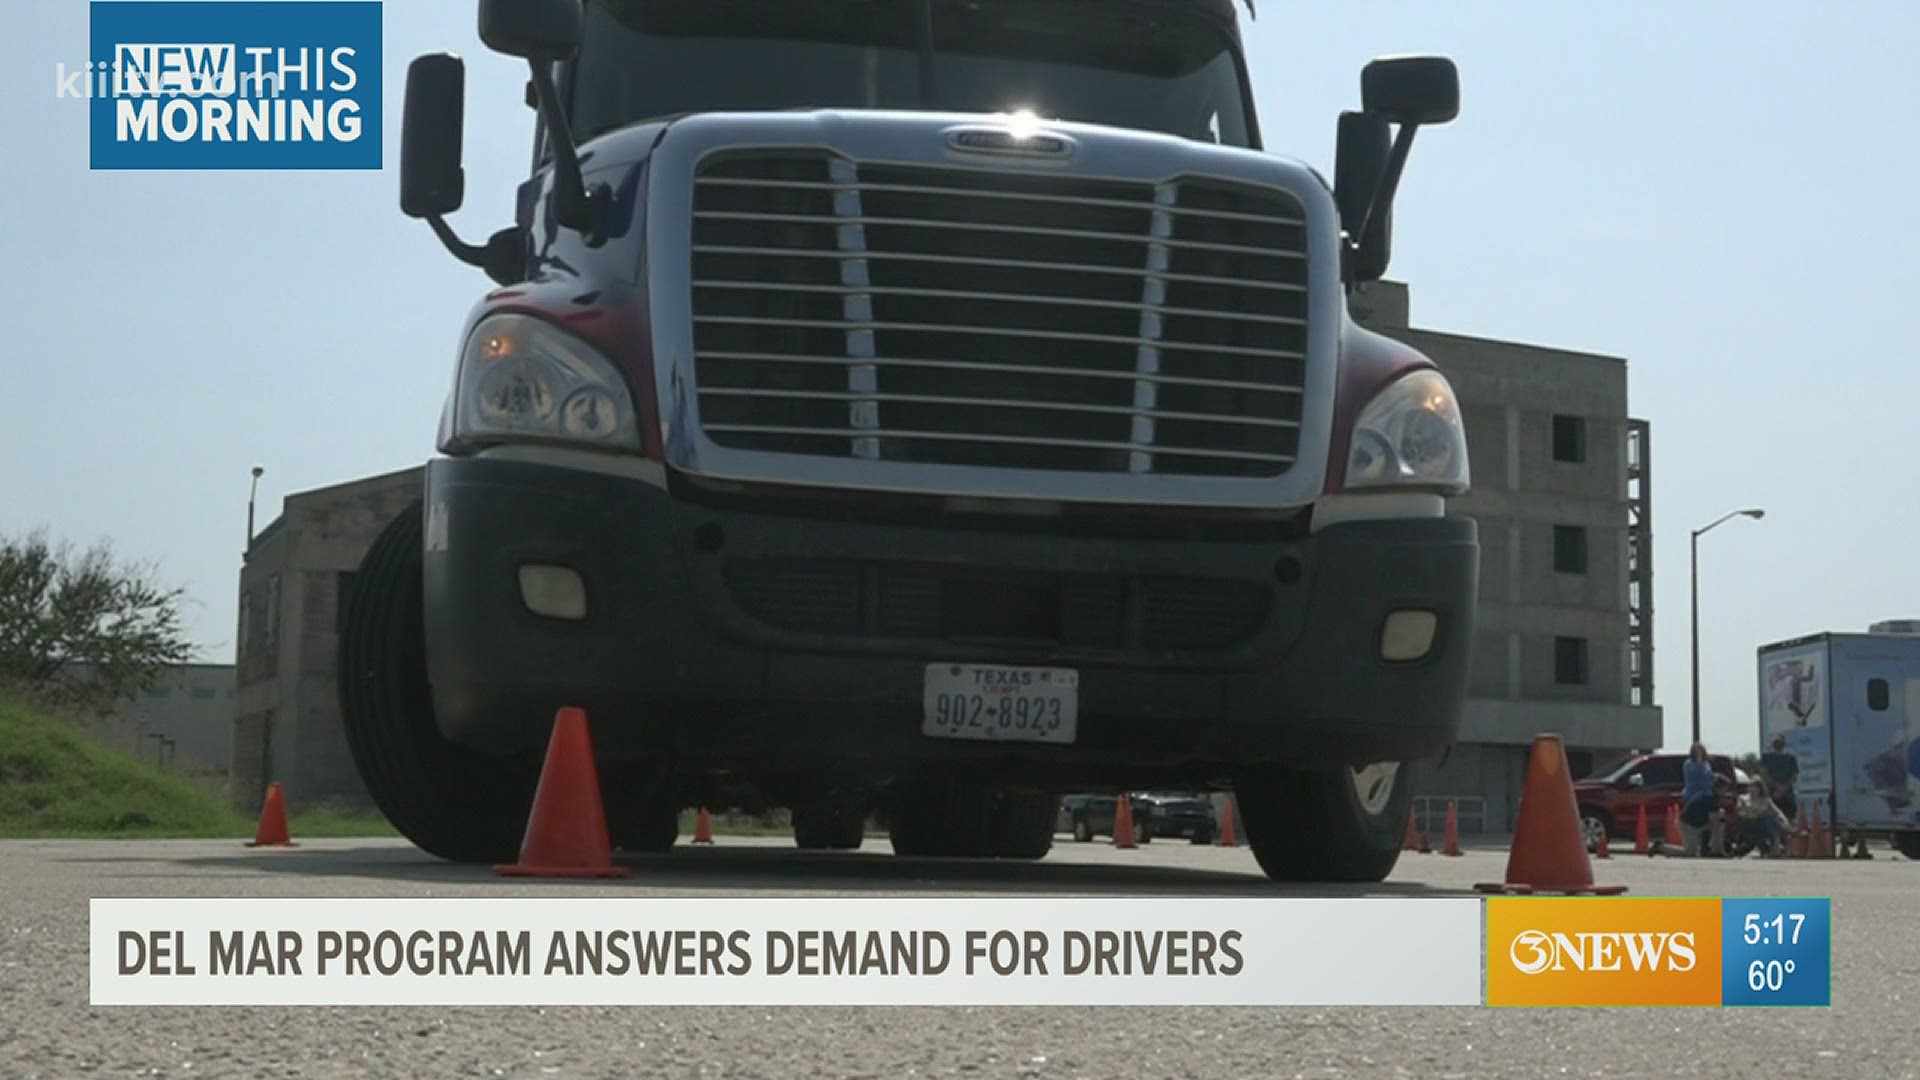 Instructors at the training program said despite the pandemic challenges, they've continued to enroll students and meet the truck-driver demand.